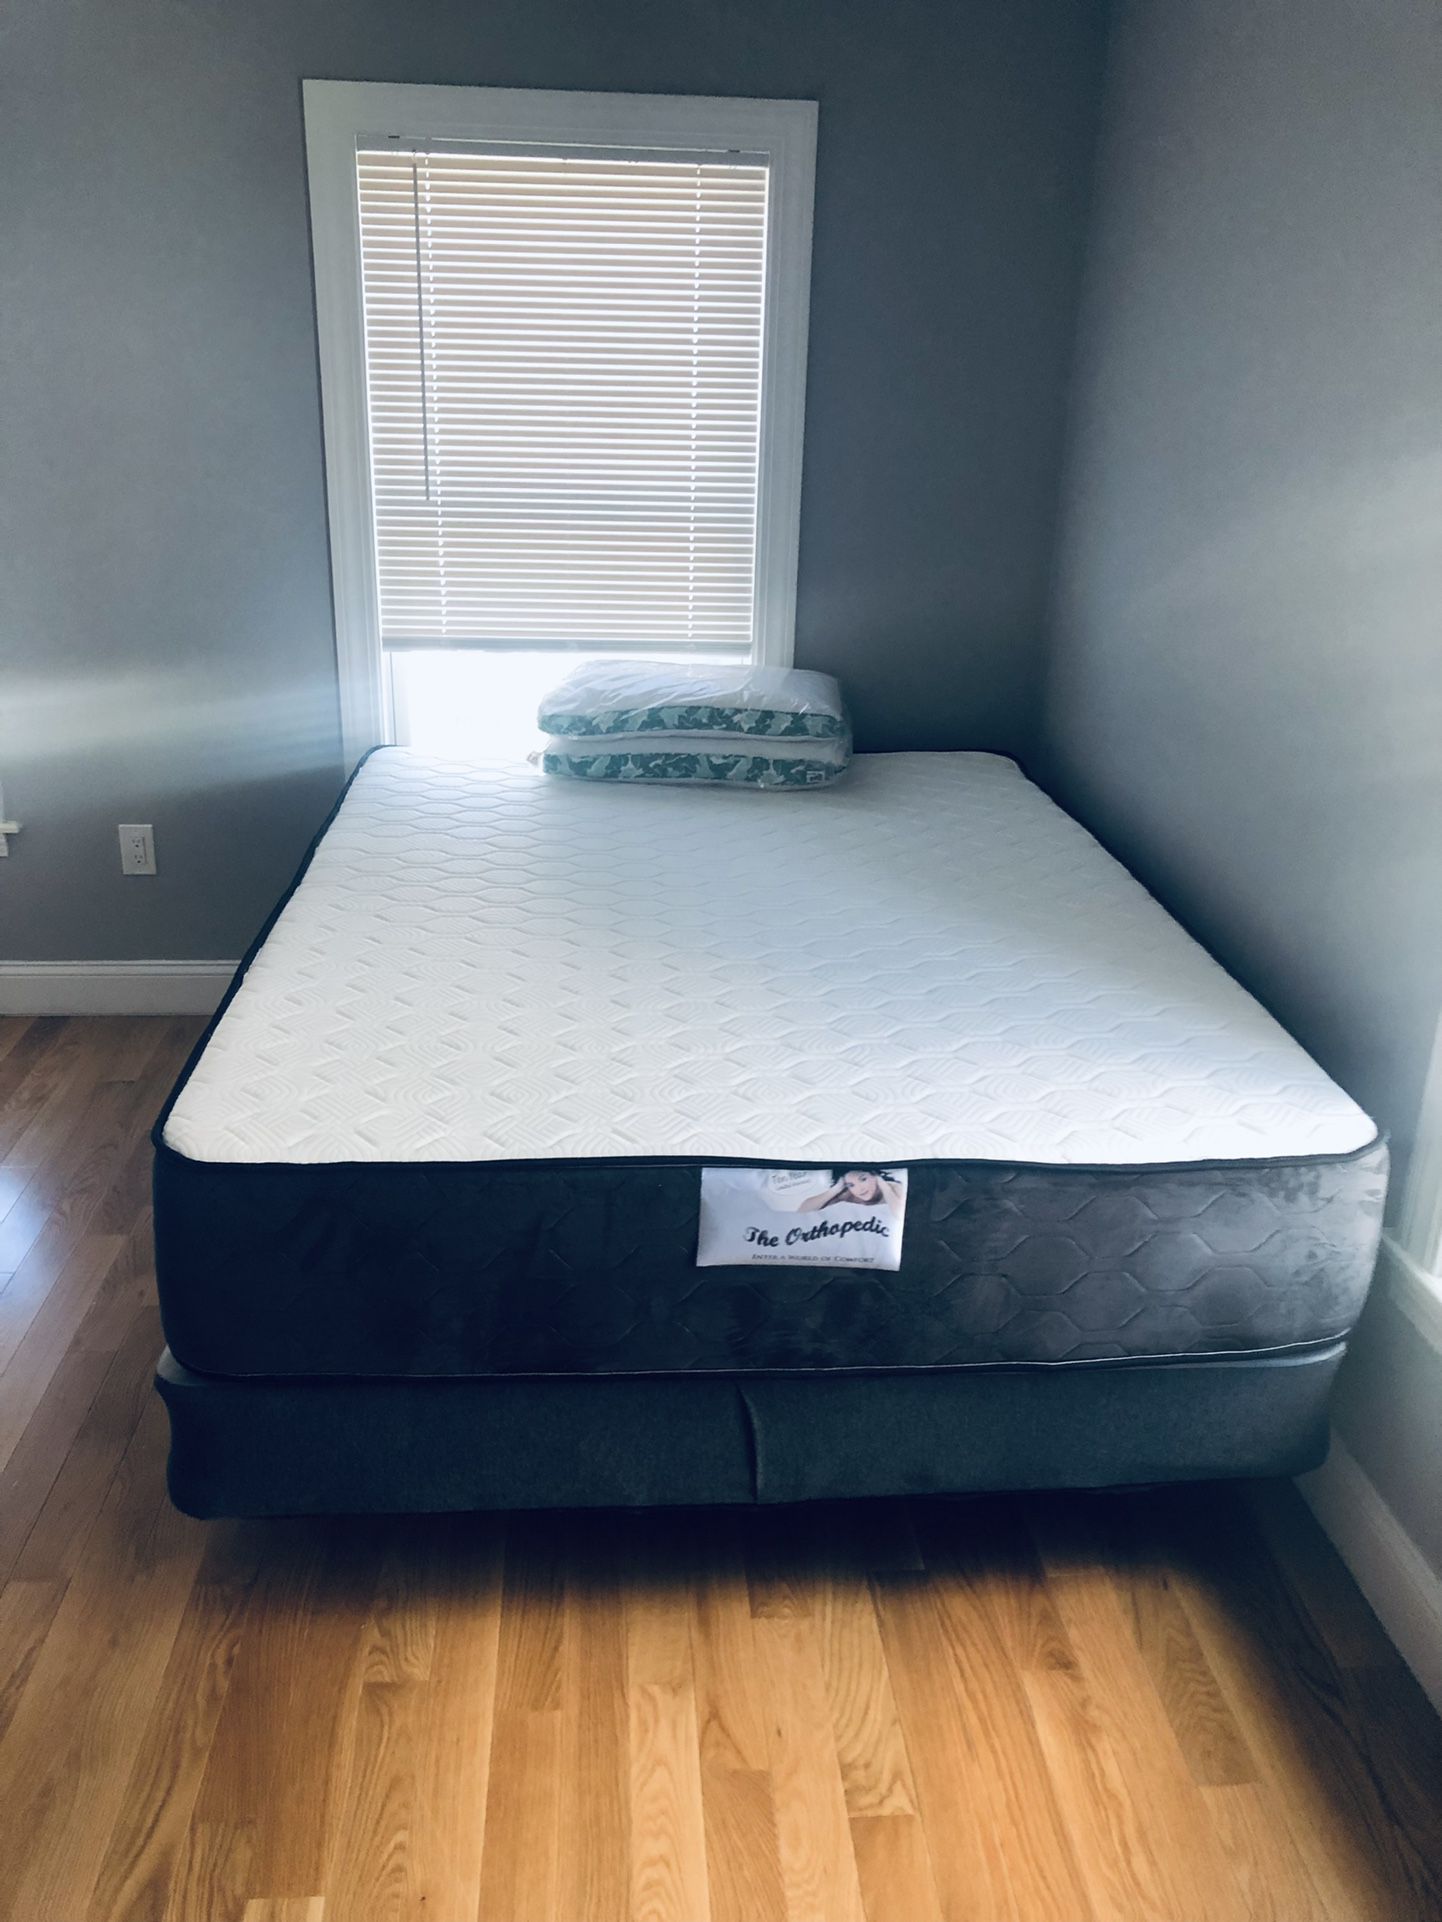  MATTRESS+Box Queen Size FOAM 12”Thick Box Spring 9”confort+Quality Brand New Delivery 🚚 Available 